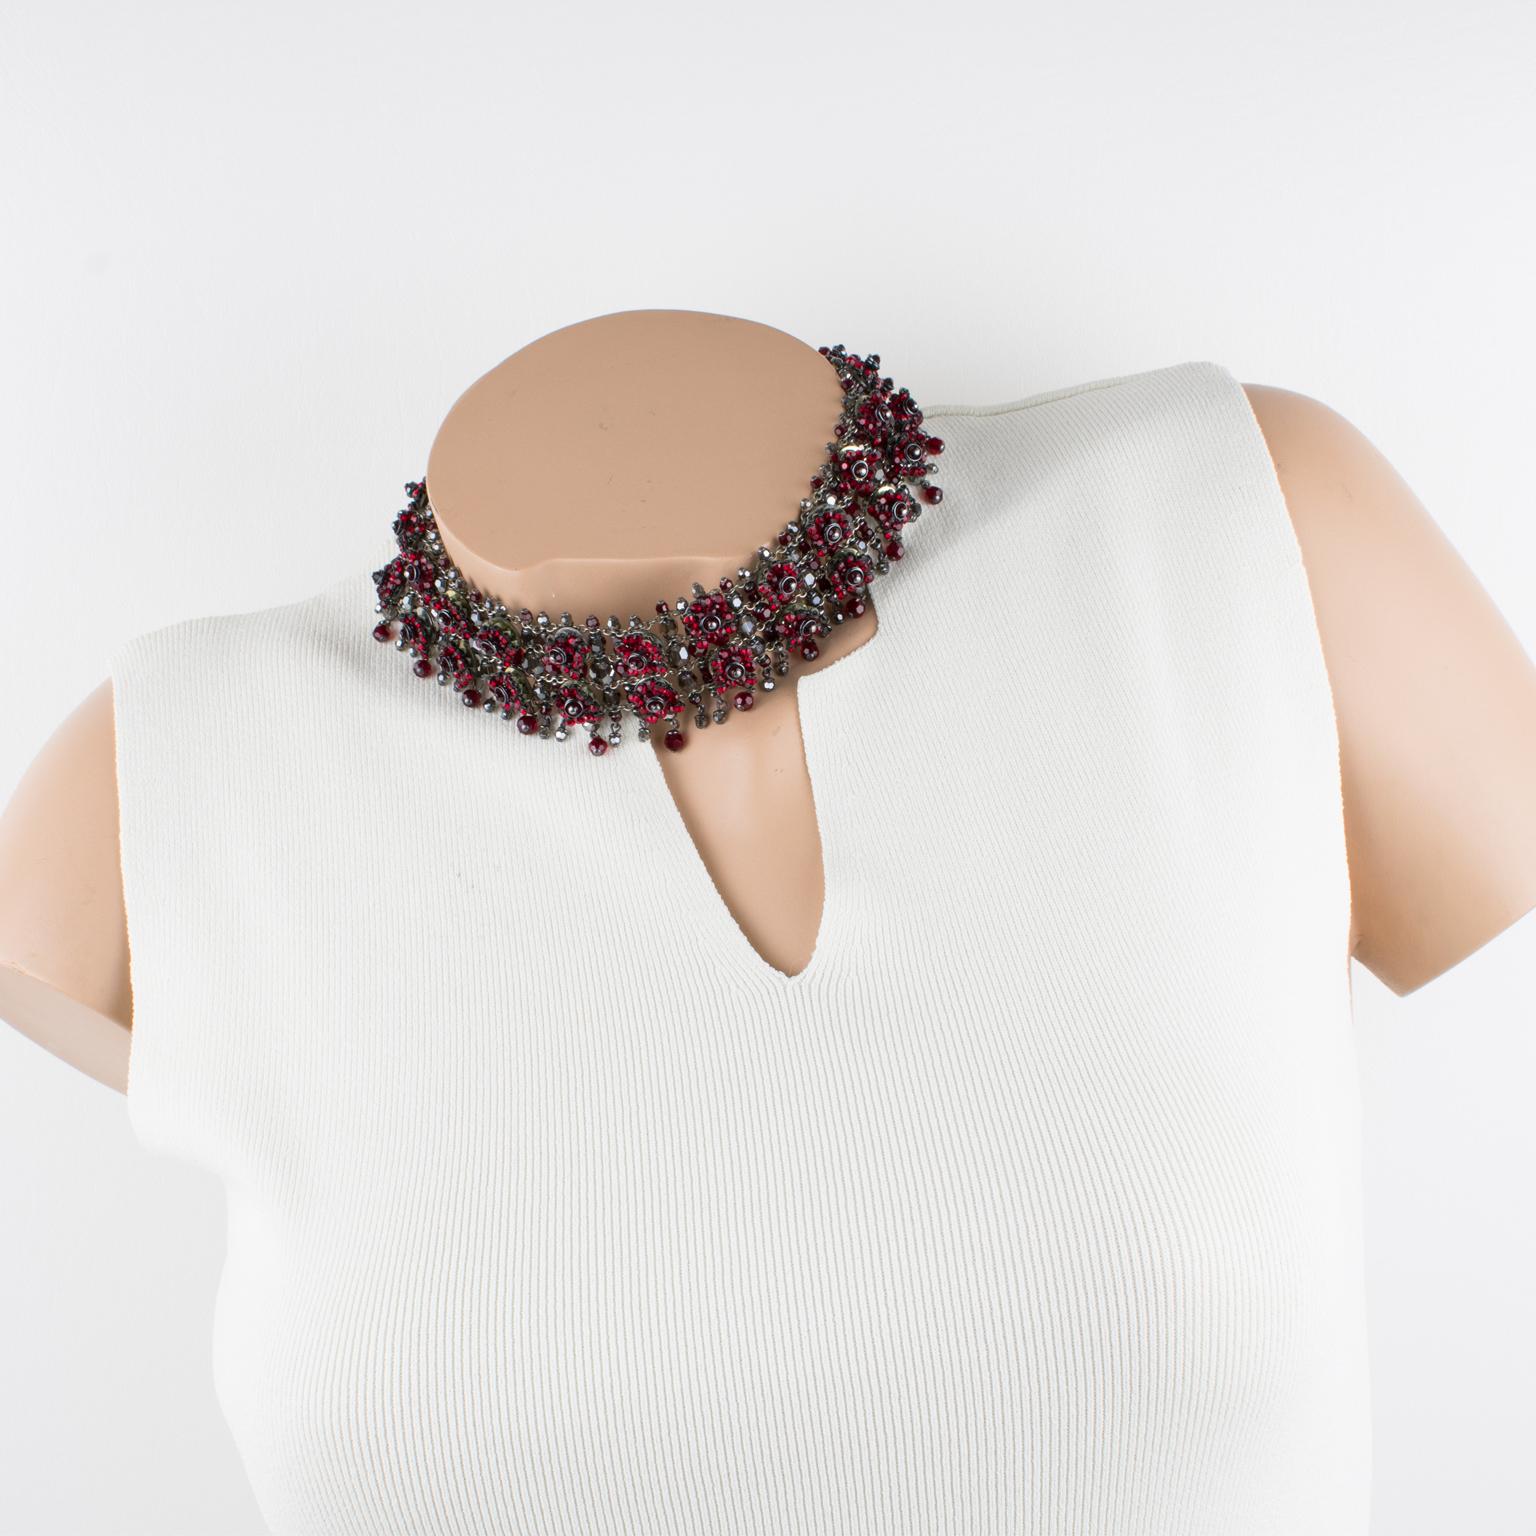 This stunning Daniel Swarovski Paris couture jeweled choker necklace features an around-the-neck shape with Victorian-inspired flair.  The choker is built with silvered metal chains background ornate with ruby red and smoked gray Swarovski crystal